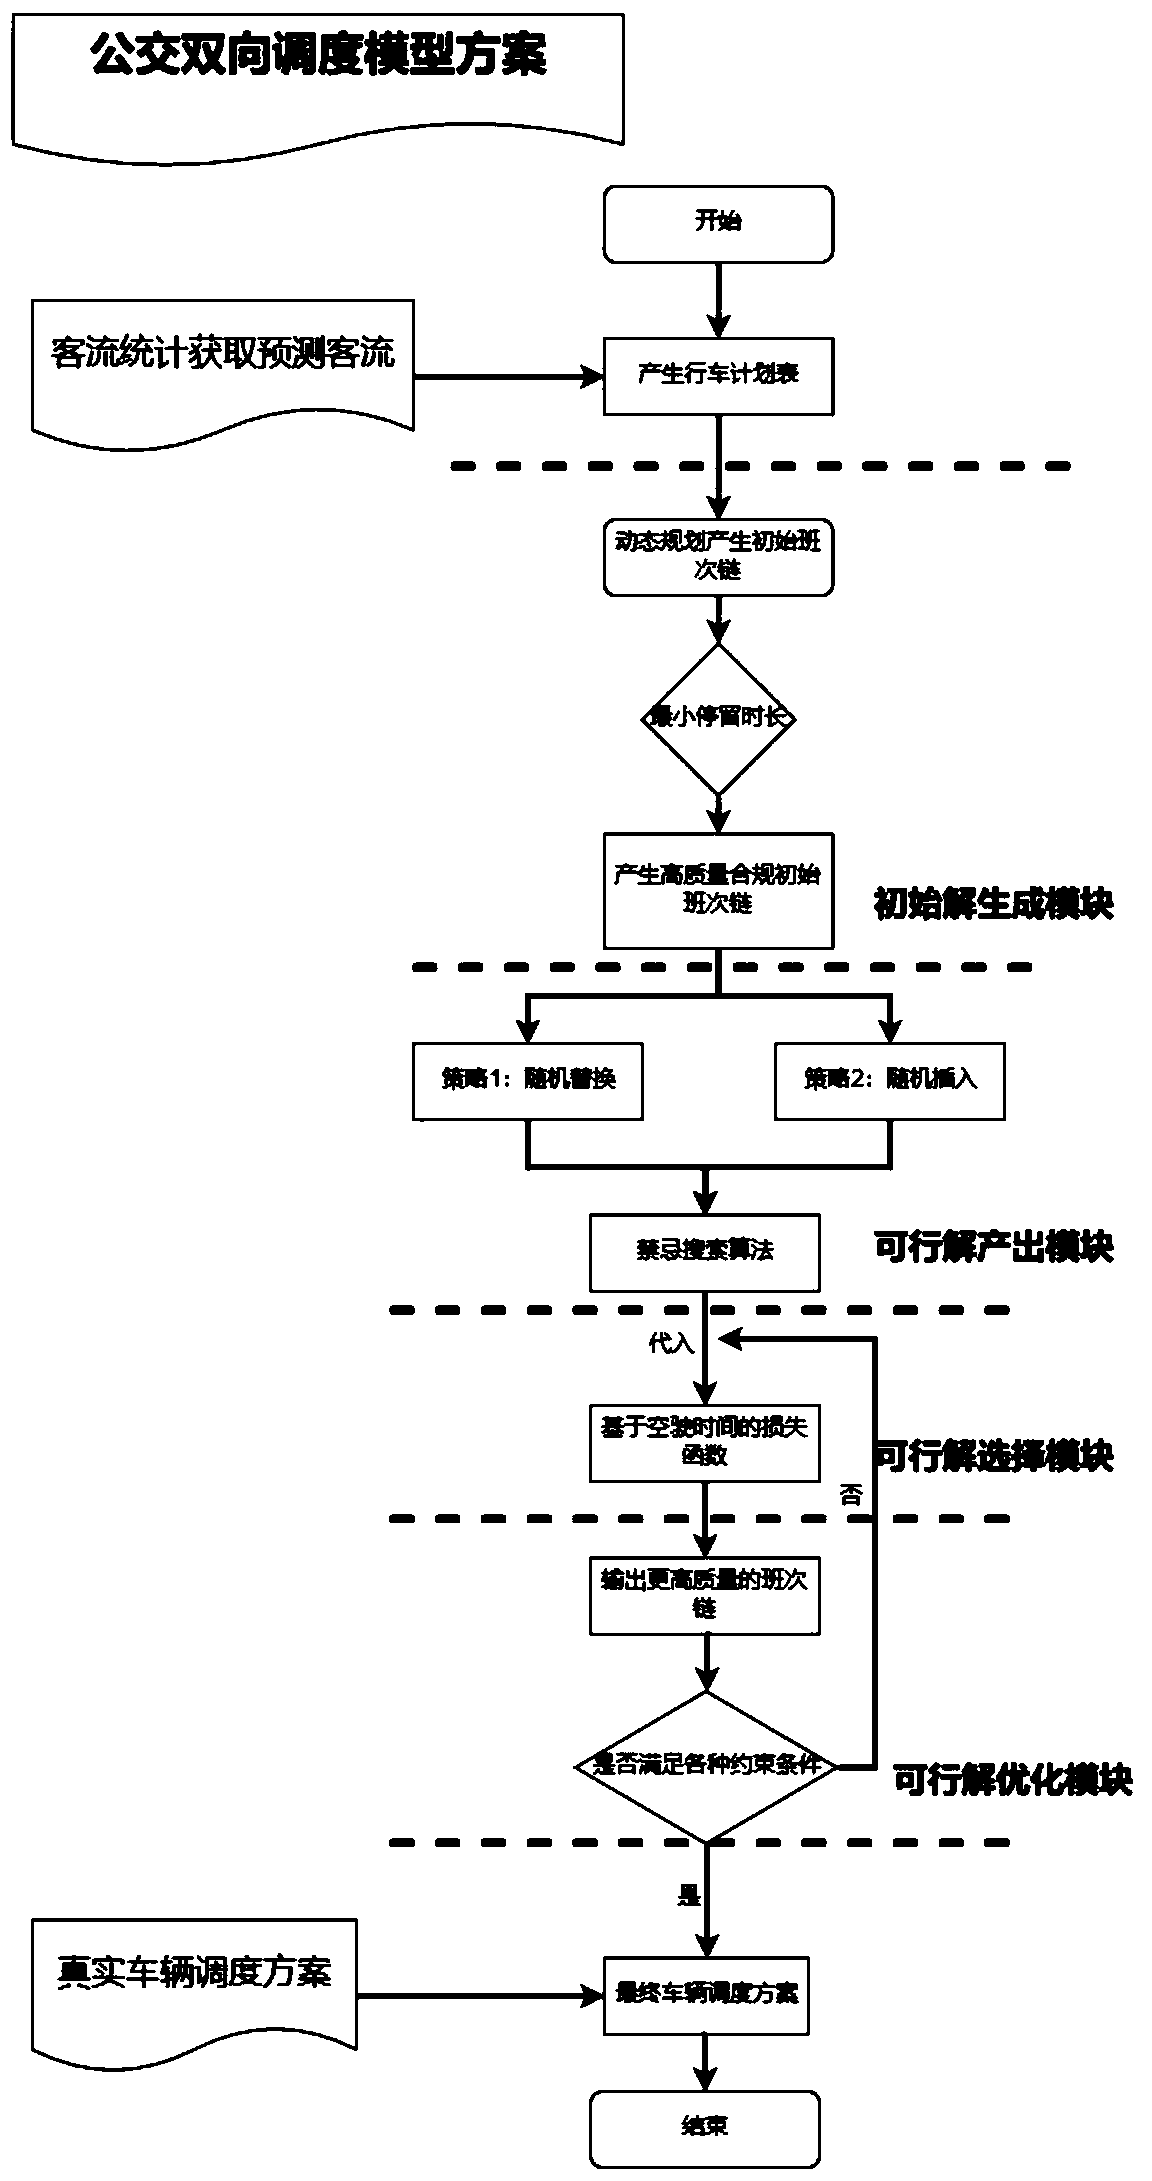 Vehicle scheduling algorithm based on greedy tabu search